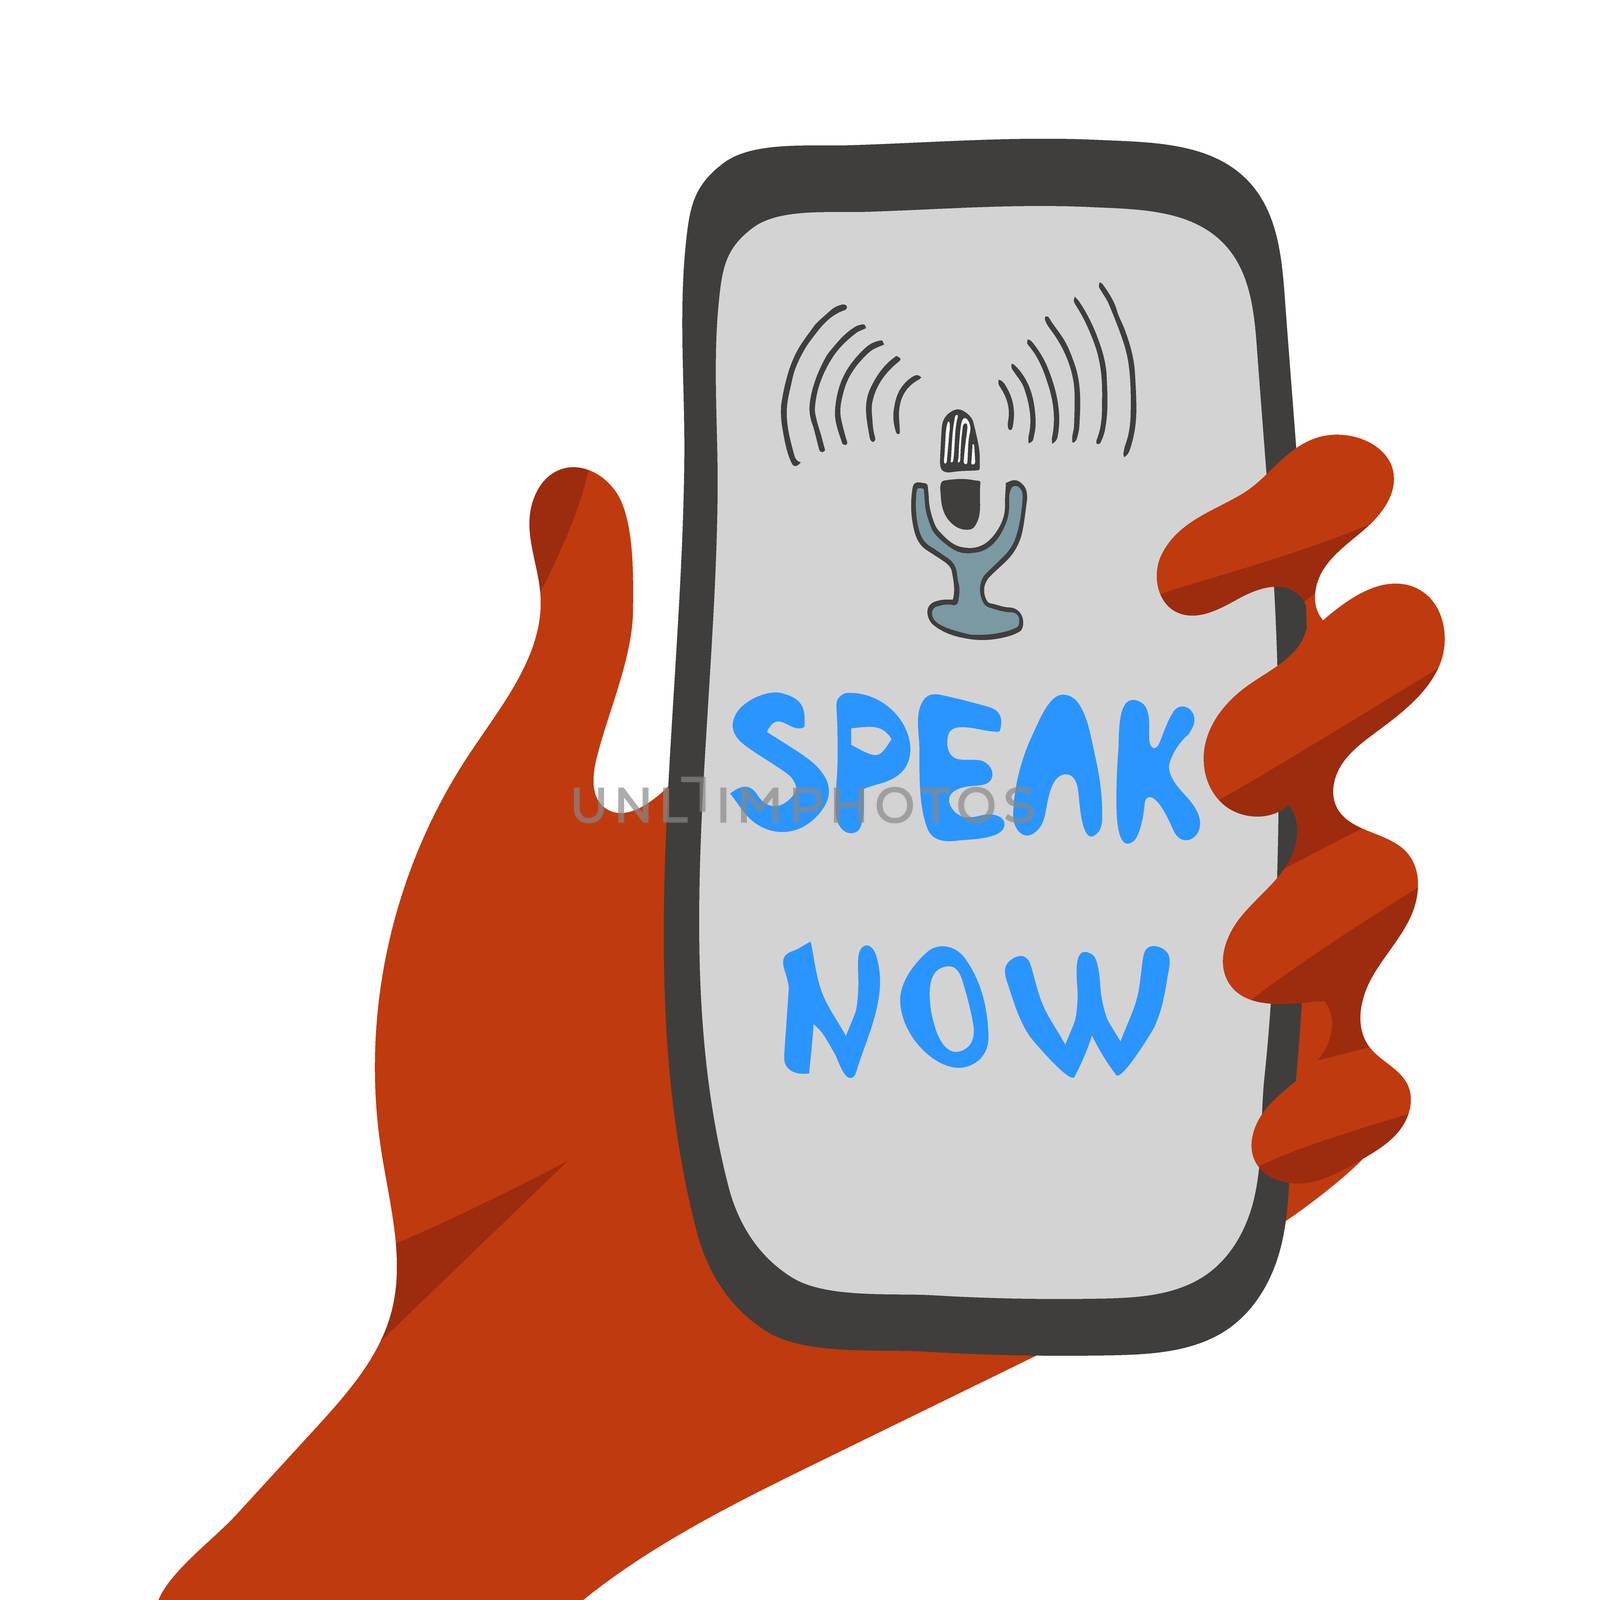 Voice recognition, hand a smartphone ith a microphone icon.